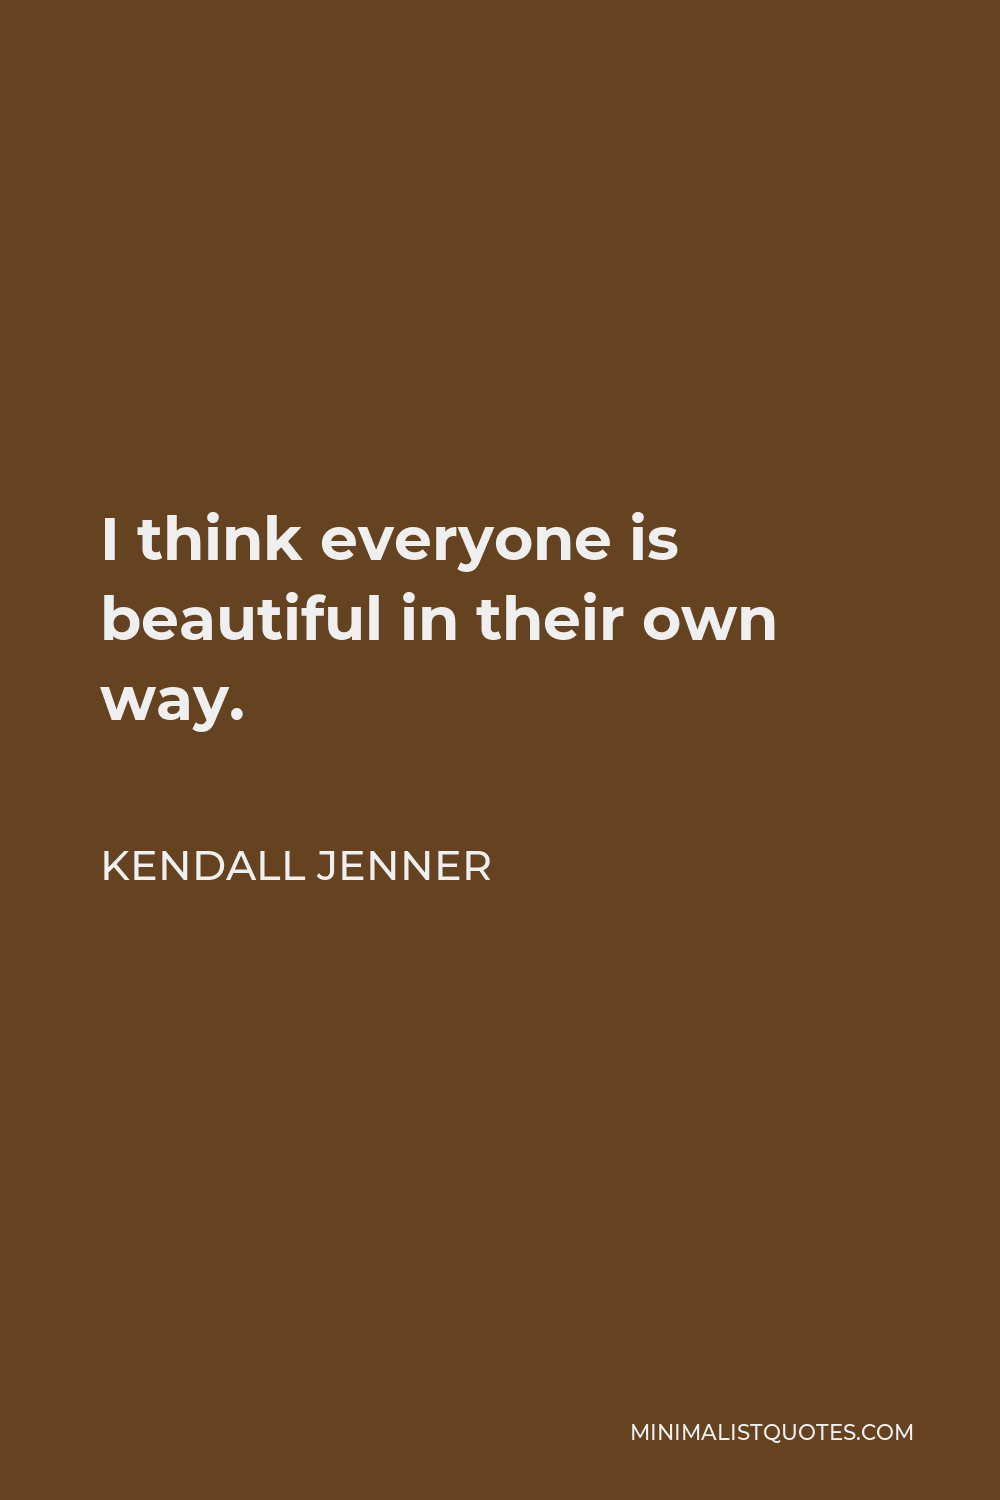 Kendall Jenner Quote - I think everyone is beautiful in their own way.